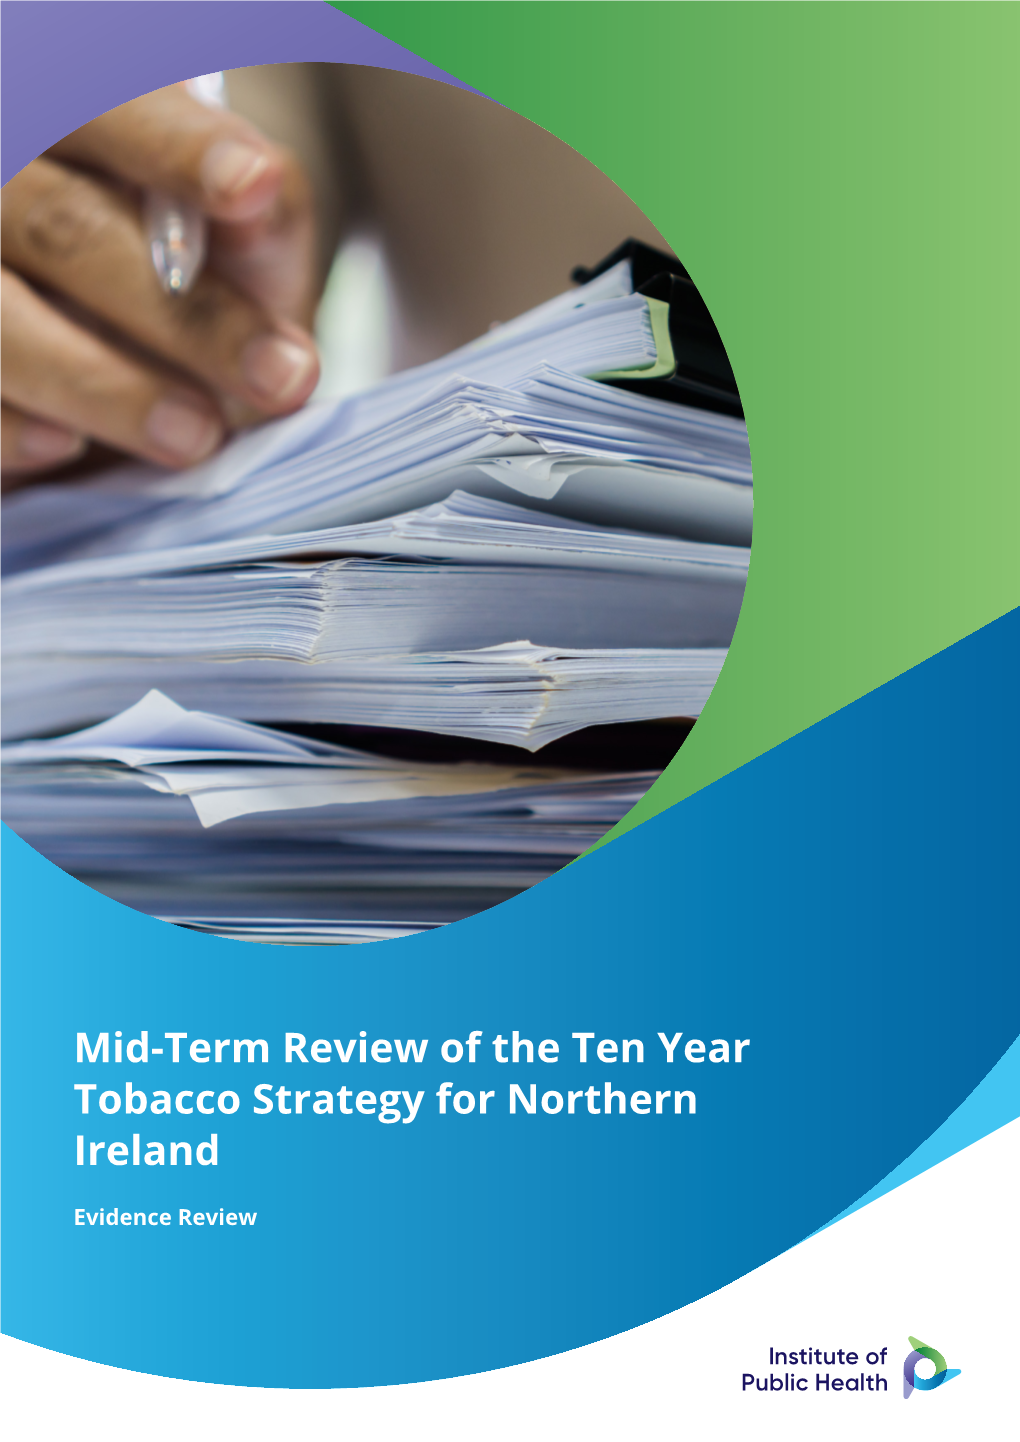 Mid-Term Review of the Ten Year Tobacco Strategy for Northern Ireland